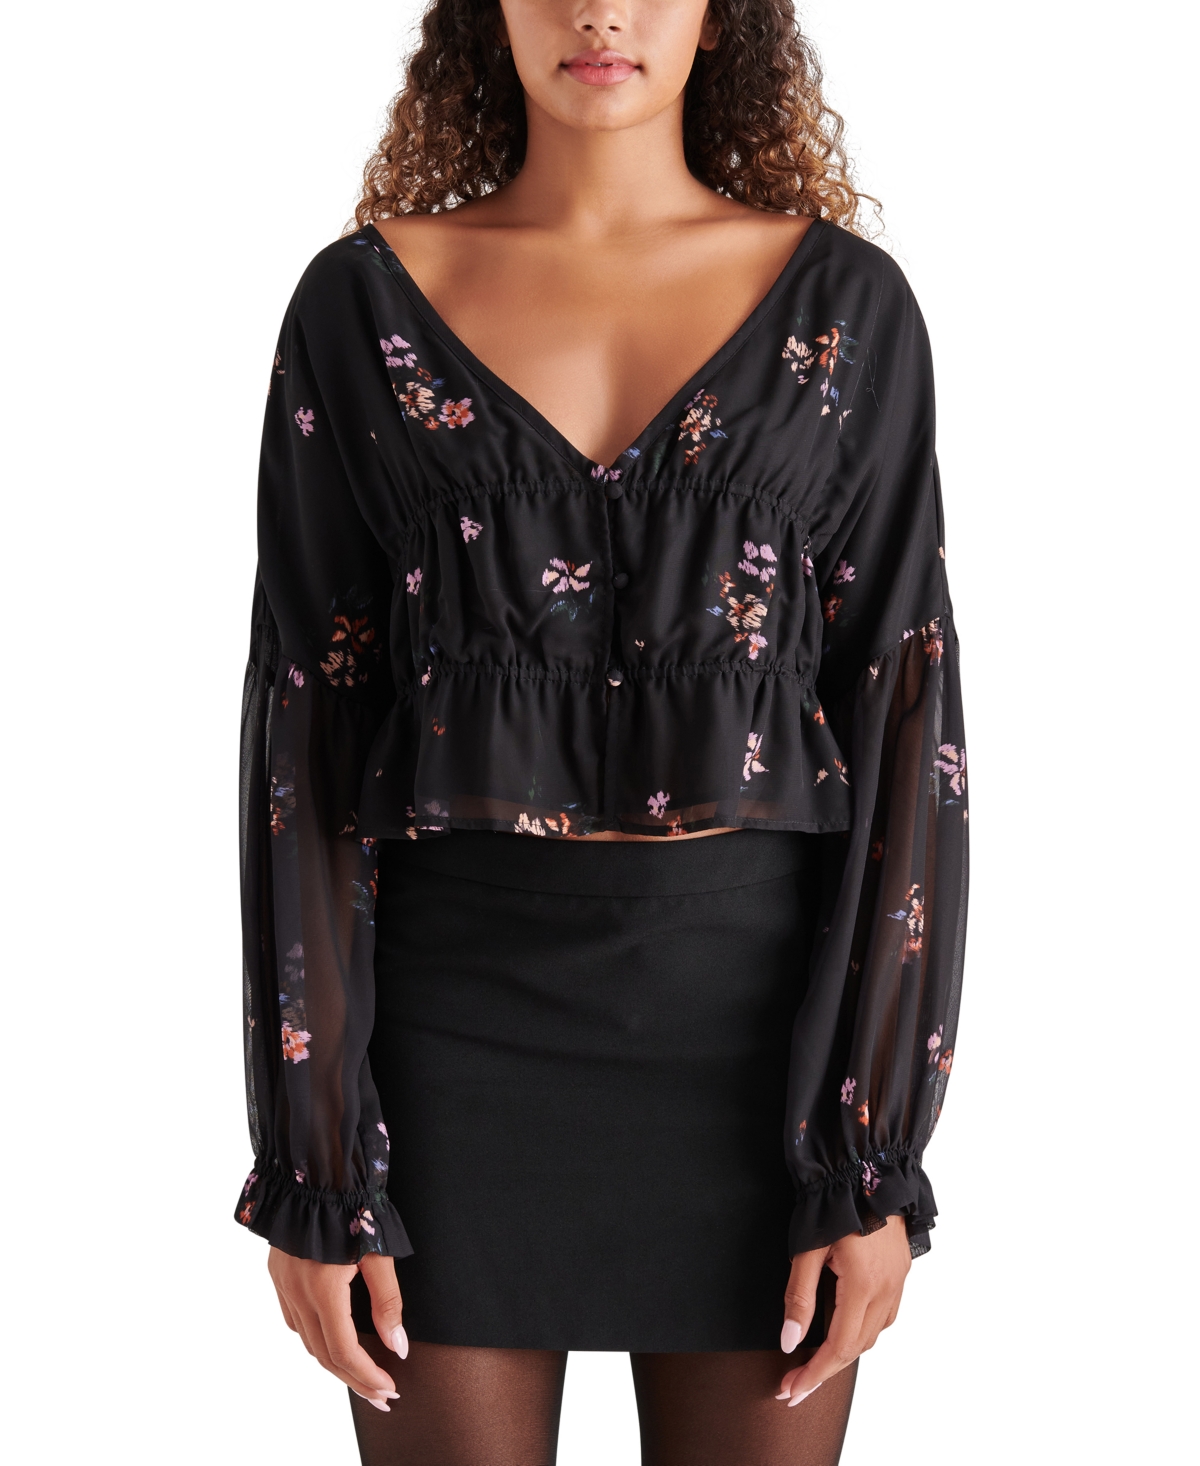 Women's Tossed Floral-Print Cinch-Waist Holly Blouse - Black Multi